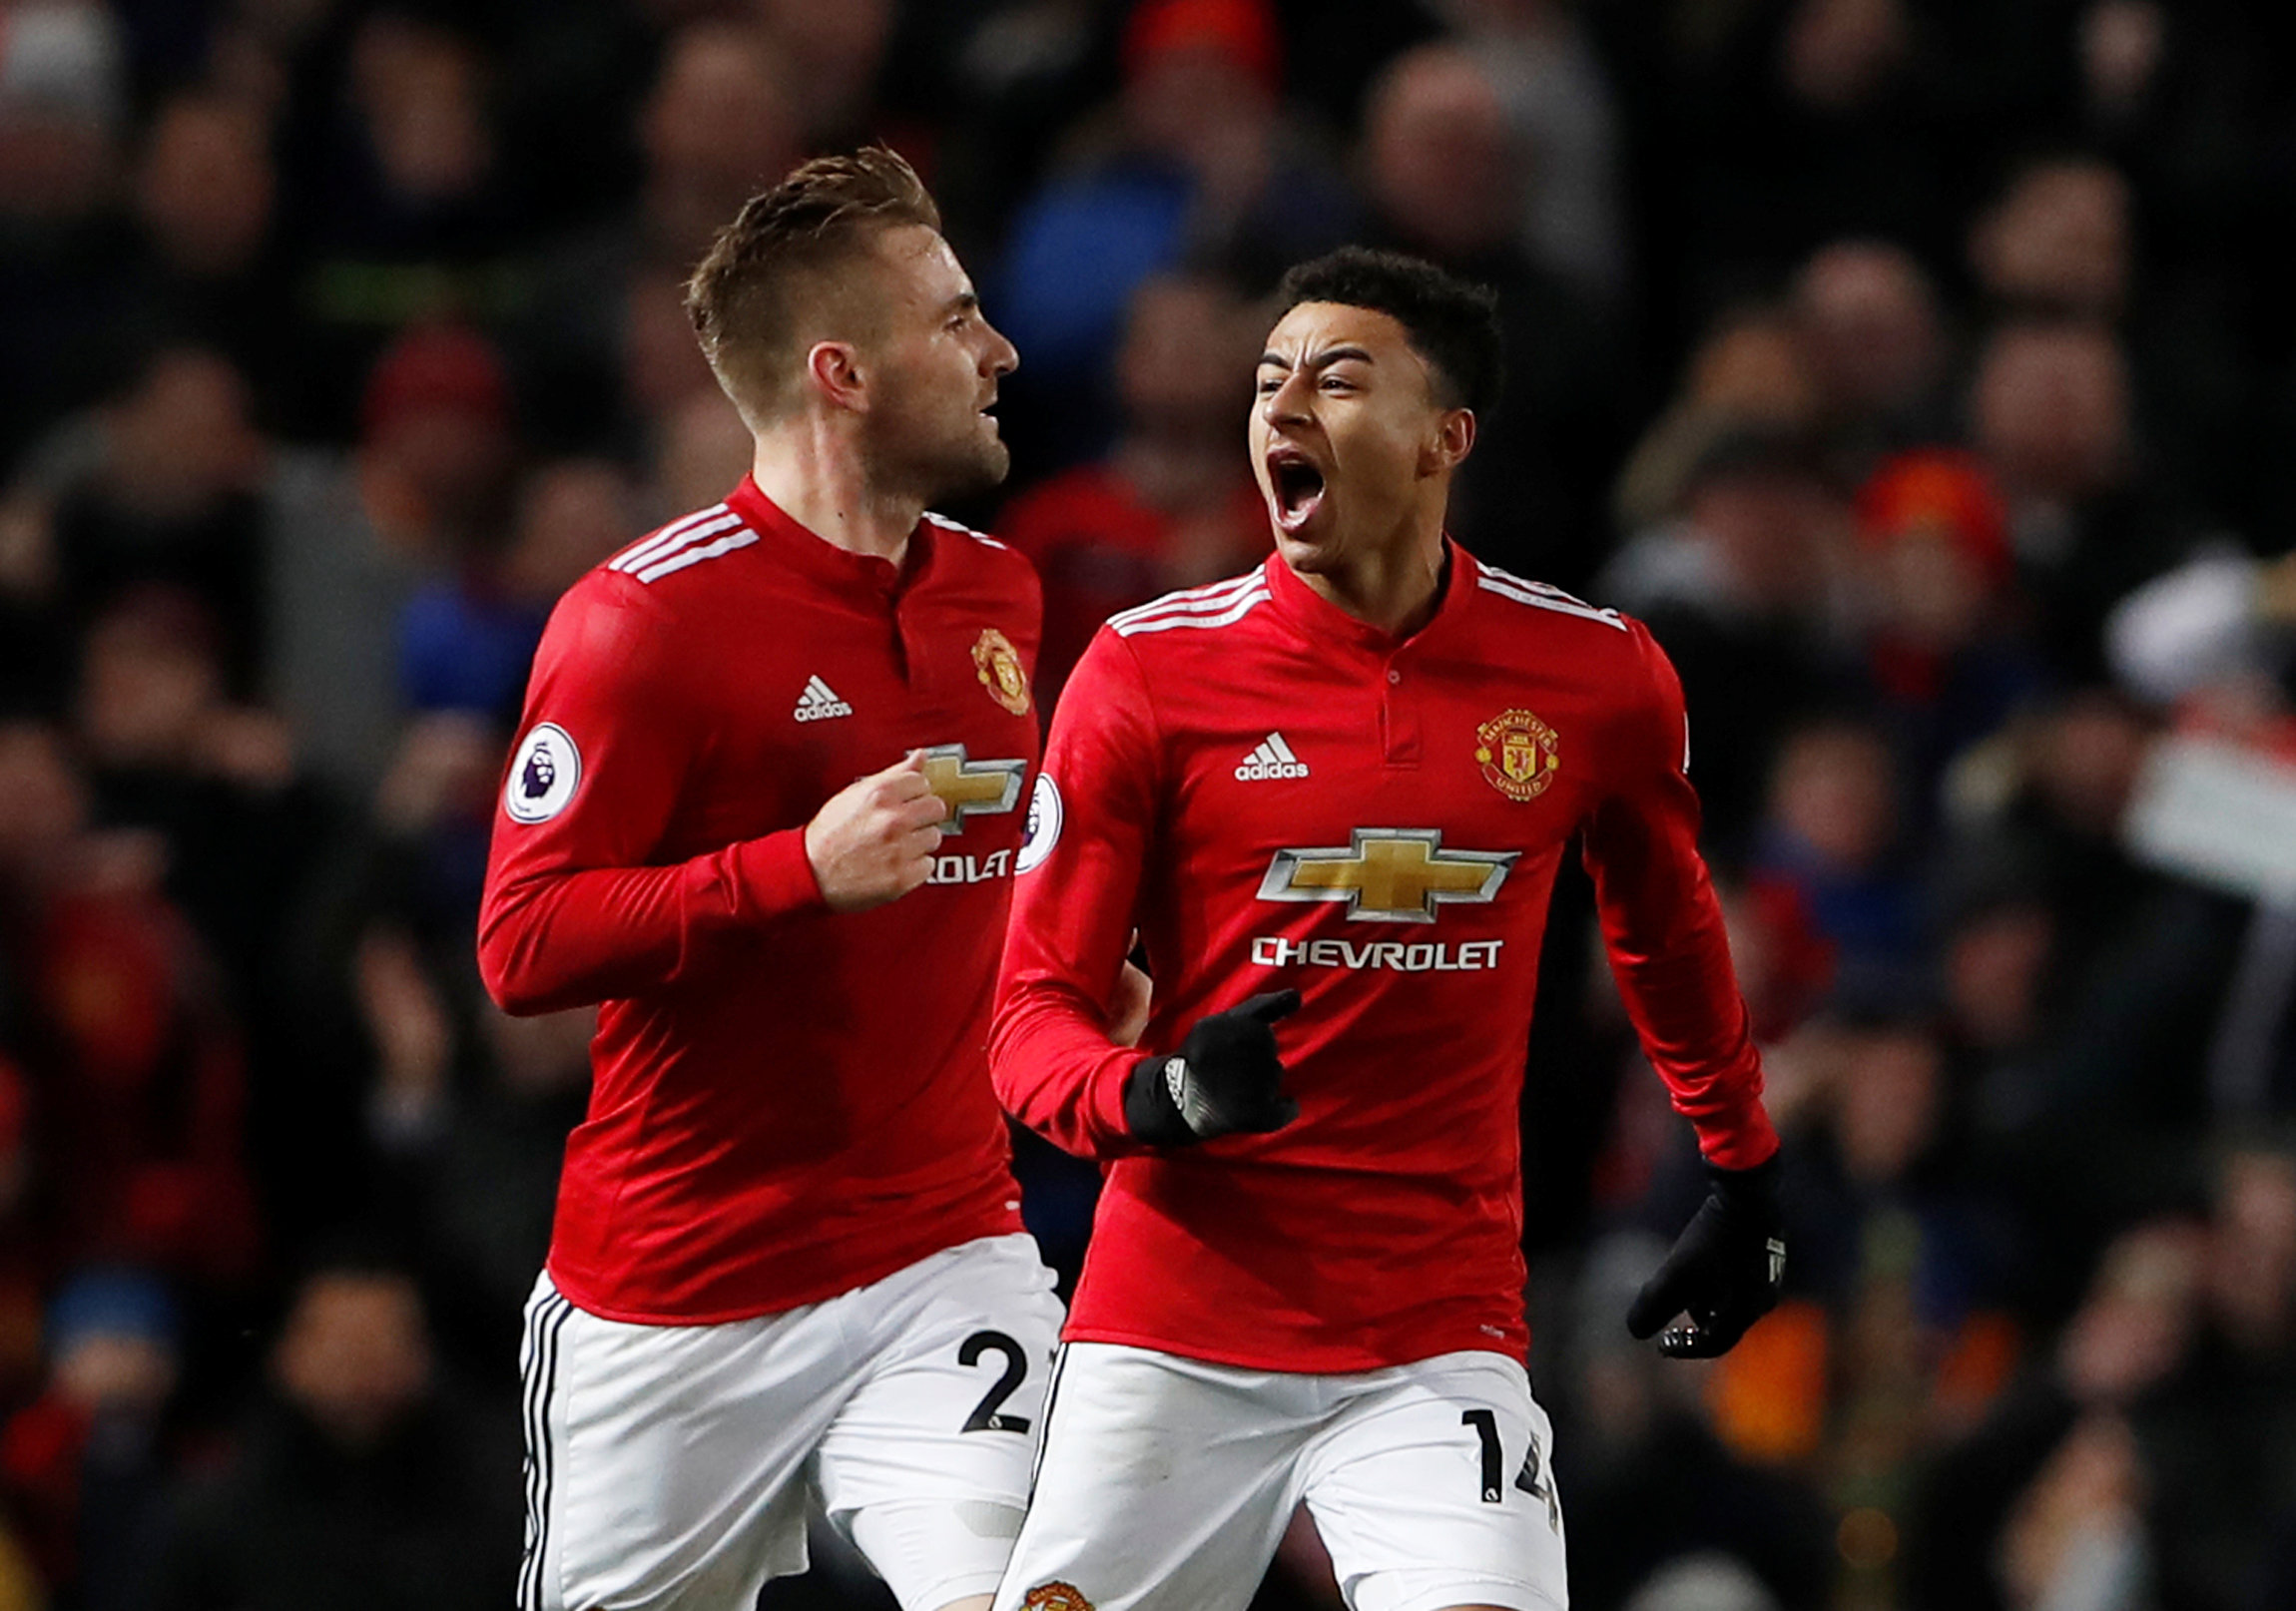 Football: Lingard double helps United draw with Burnley